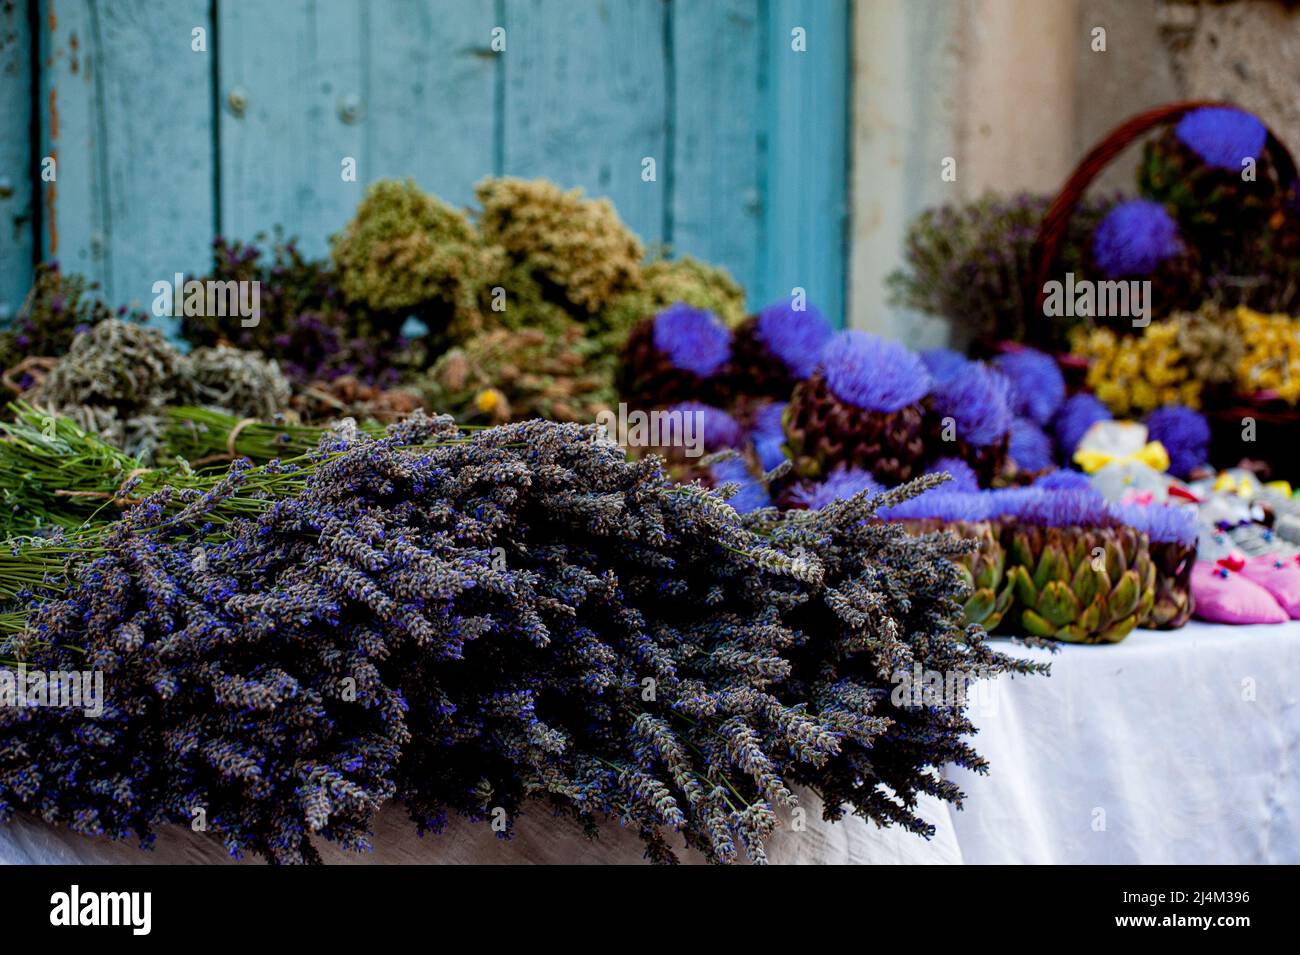 Fragrant sachets and potpourri bags in baskets and on table tops at an outdoor flea market in Alaçati, Turkey. Stock Photo